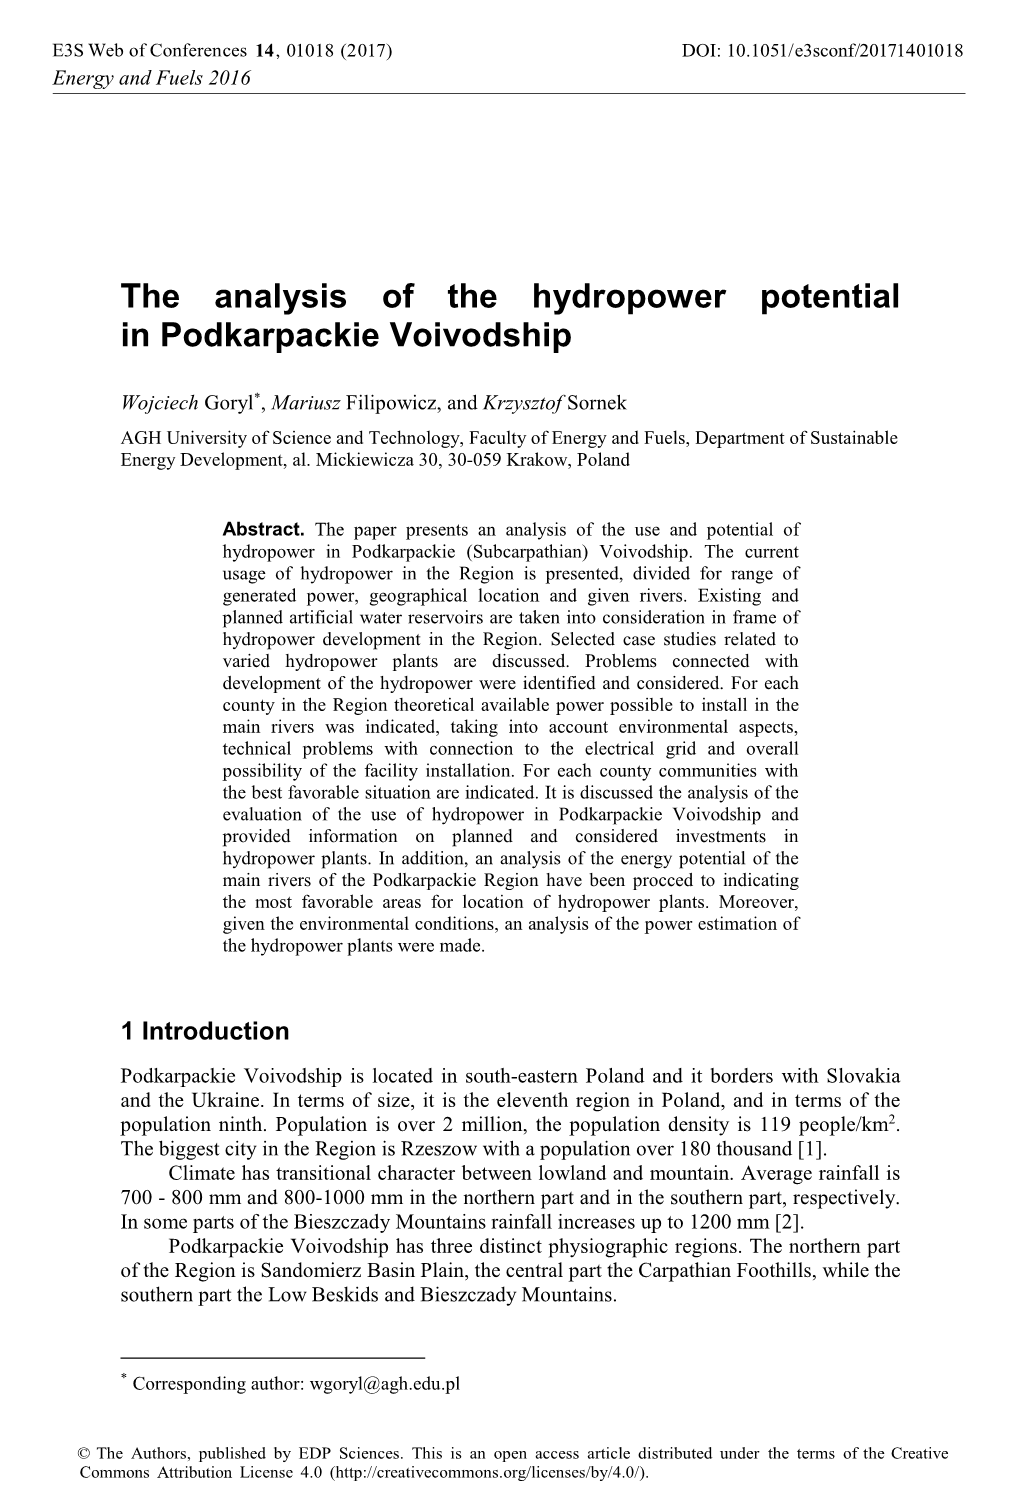 The Analysis of the Hydropower Potential in Podkarpackie Voivodship